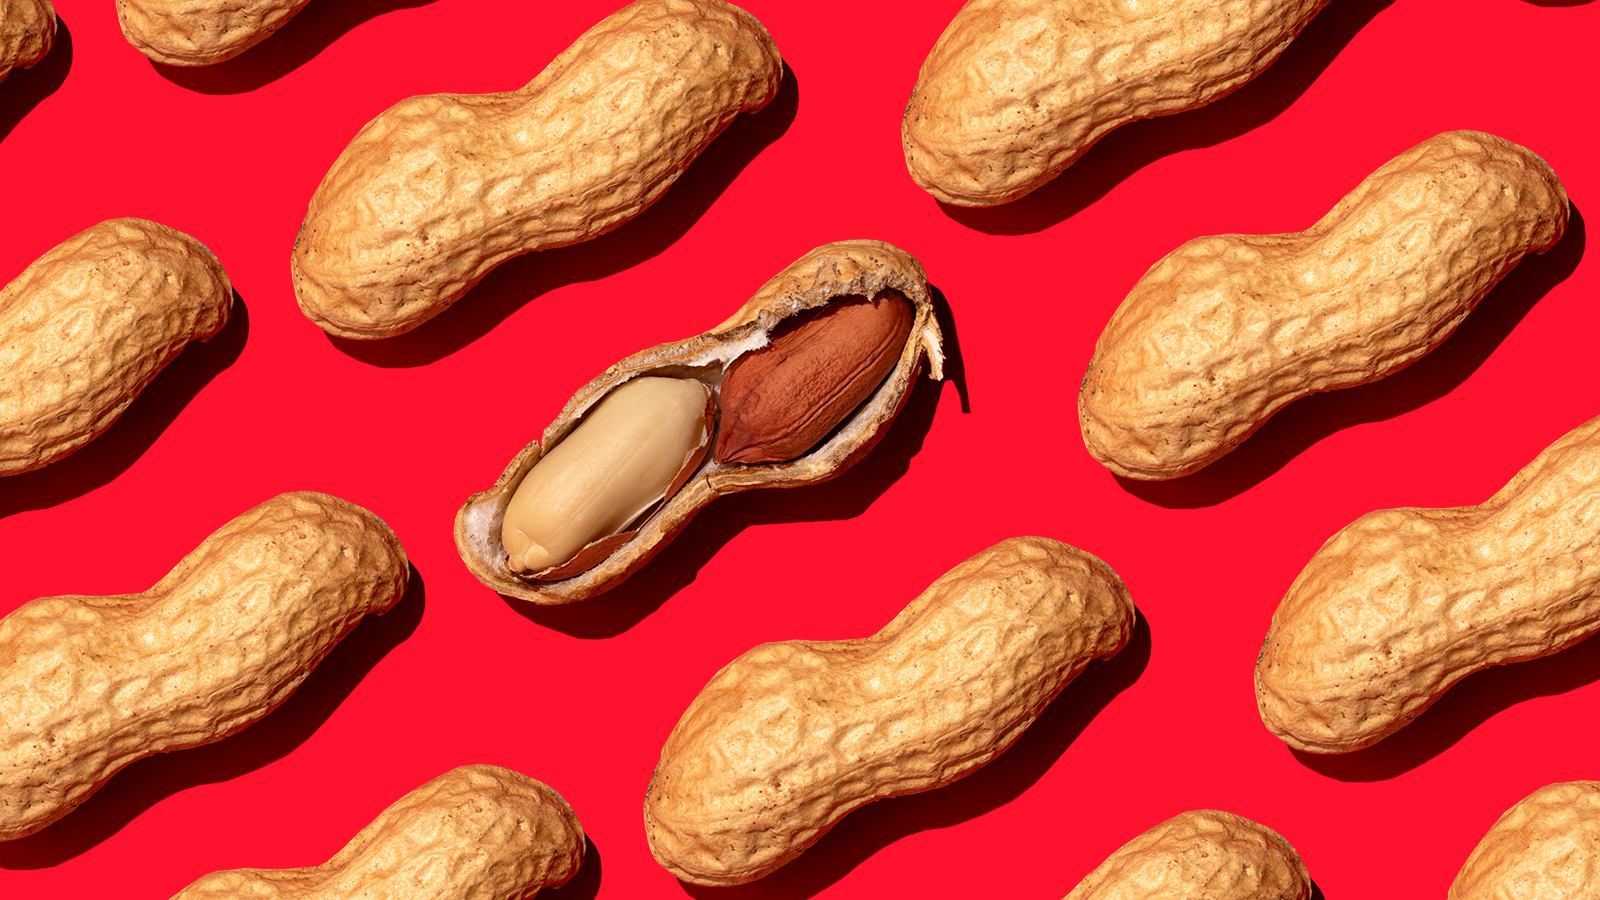 Whole peanuts on red background